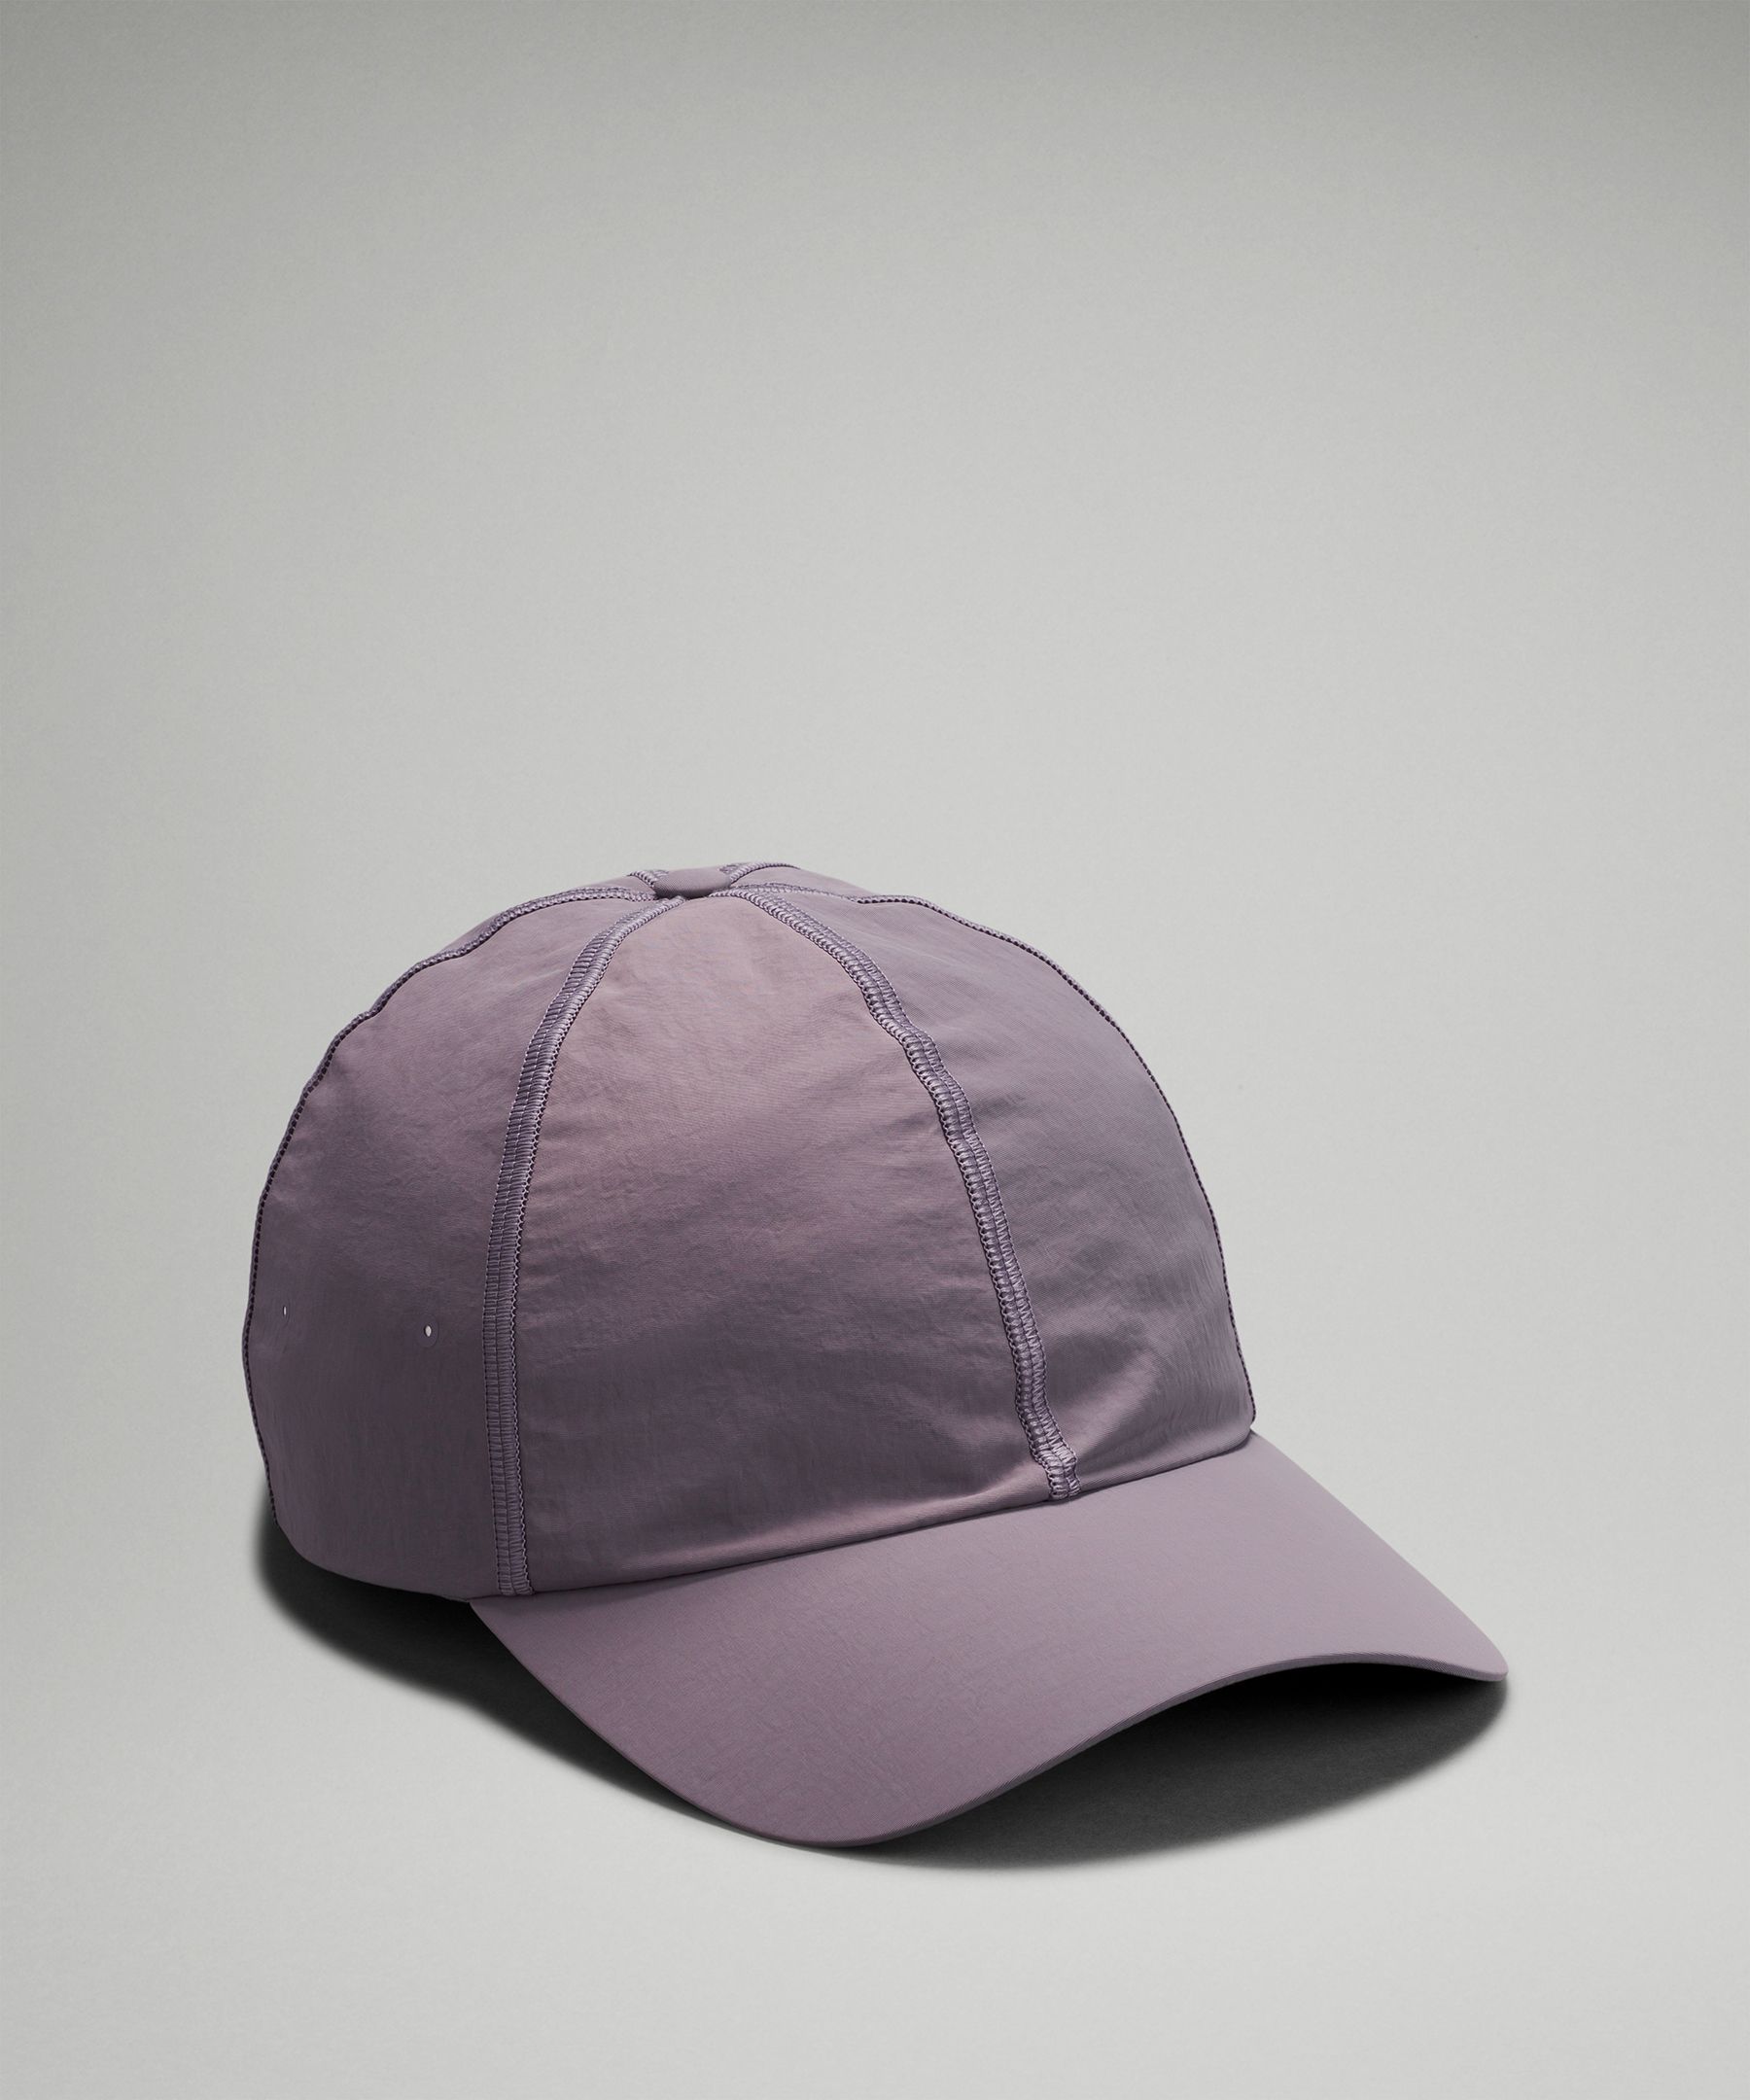 Lululemon Baller Hat Soft Review  International Society of Precision  Agriculture